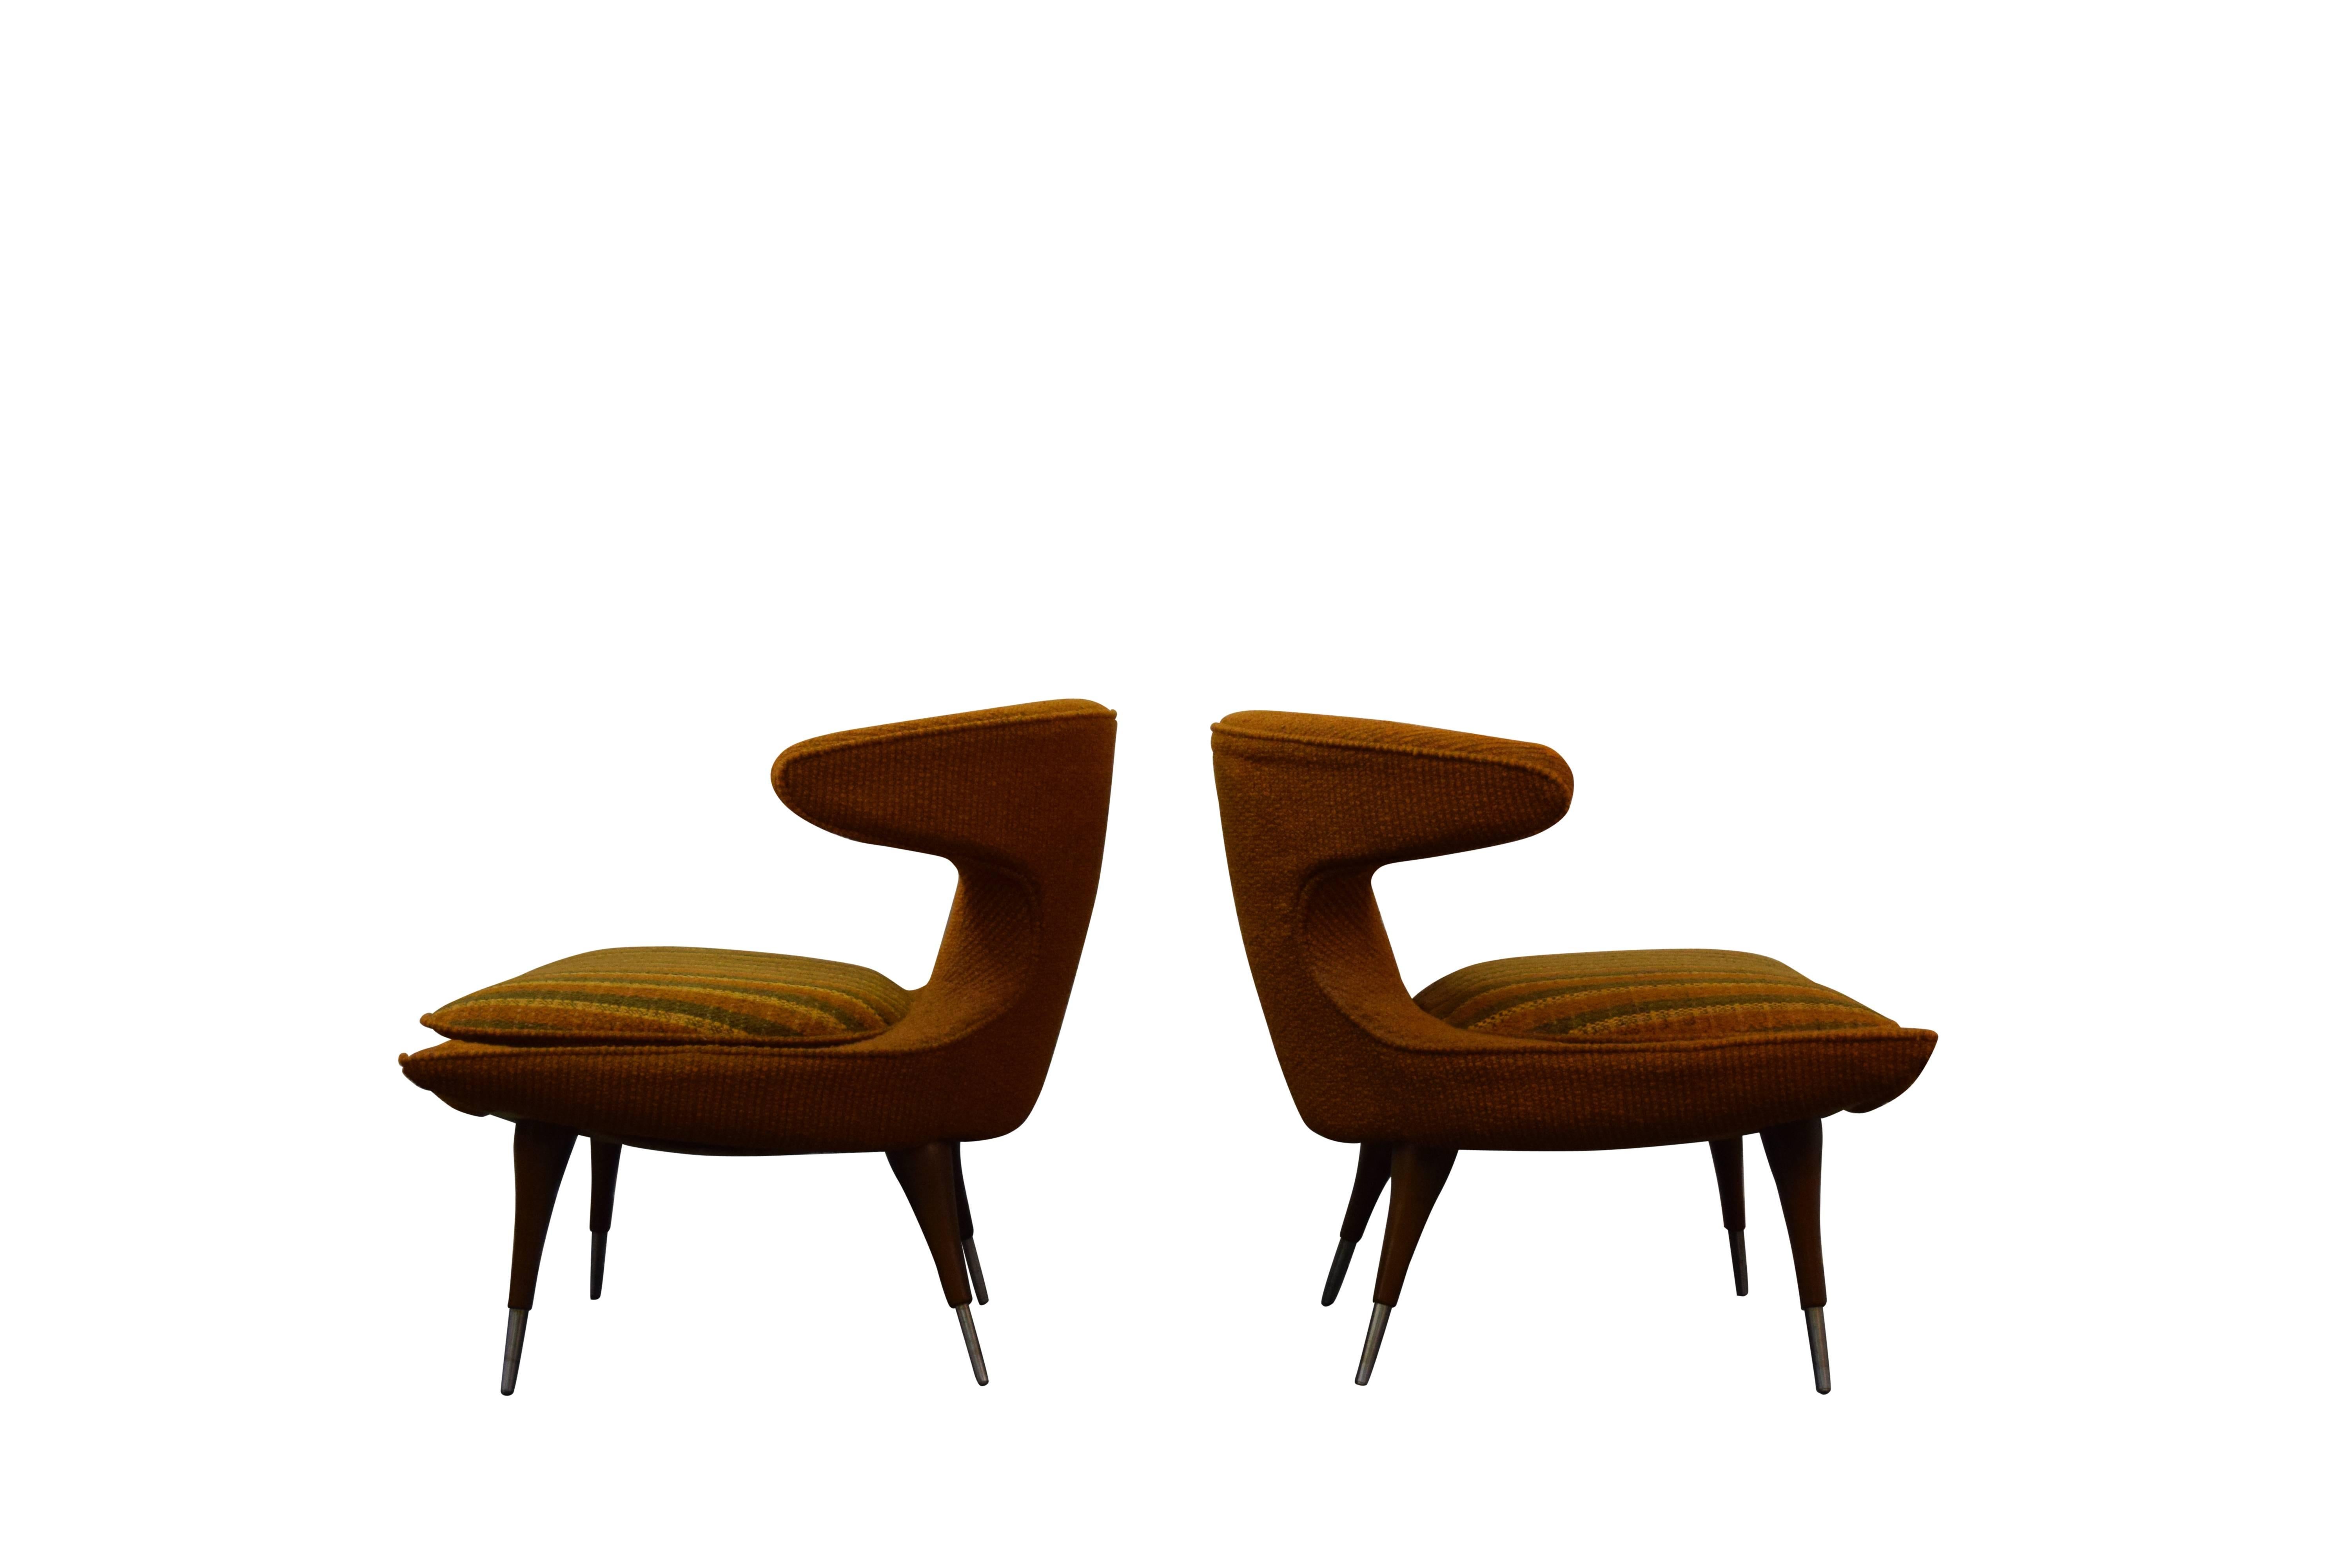 Pair of horn chairs by Karpen of California.